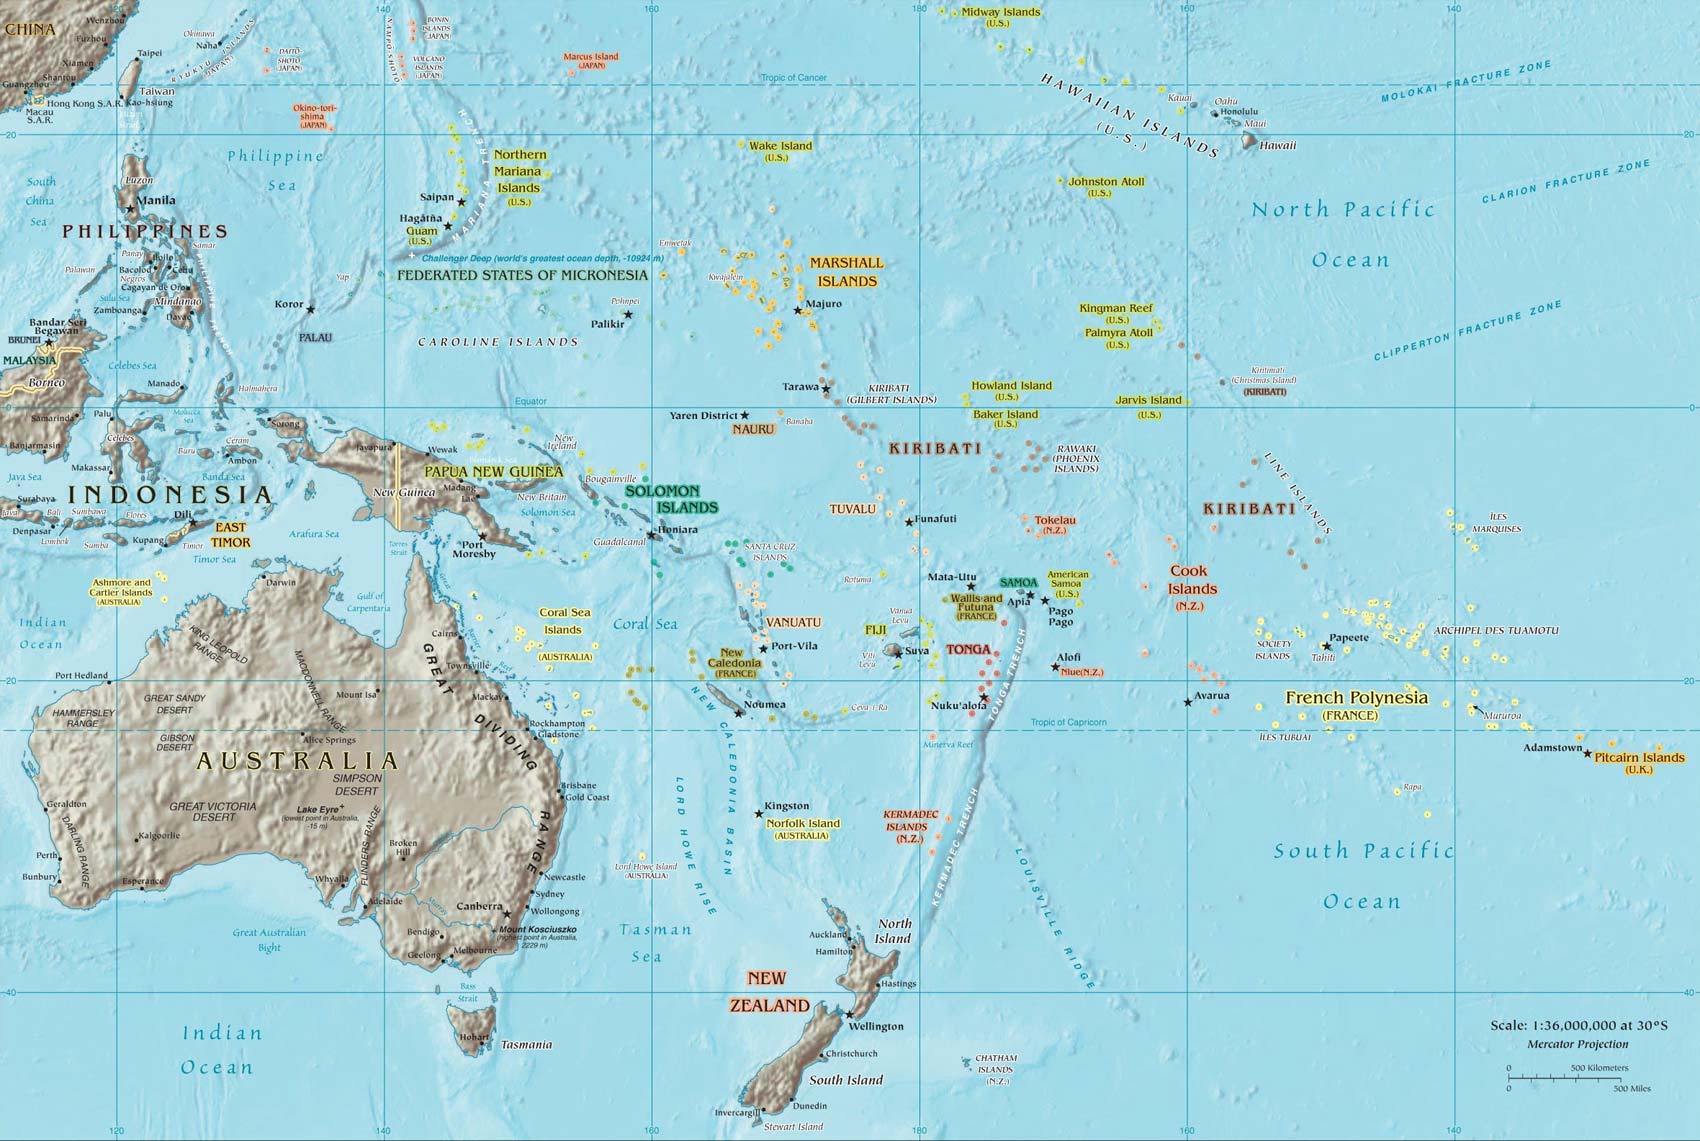 South Pacific Islands Surf Trip Destintions Map